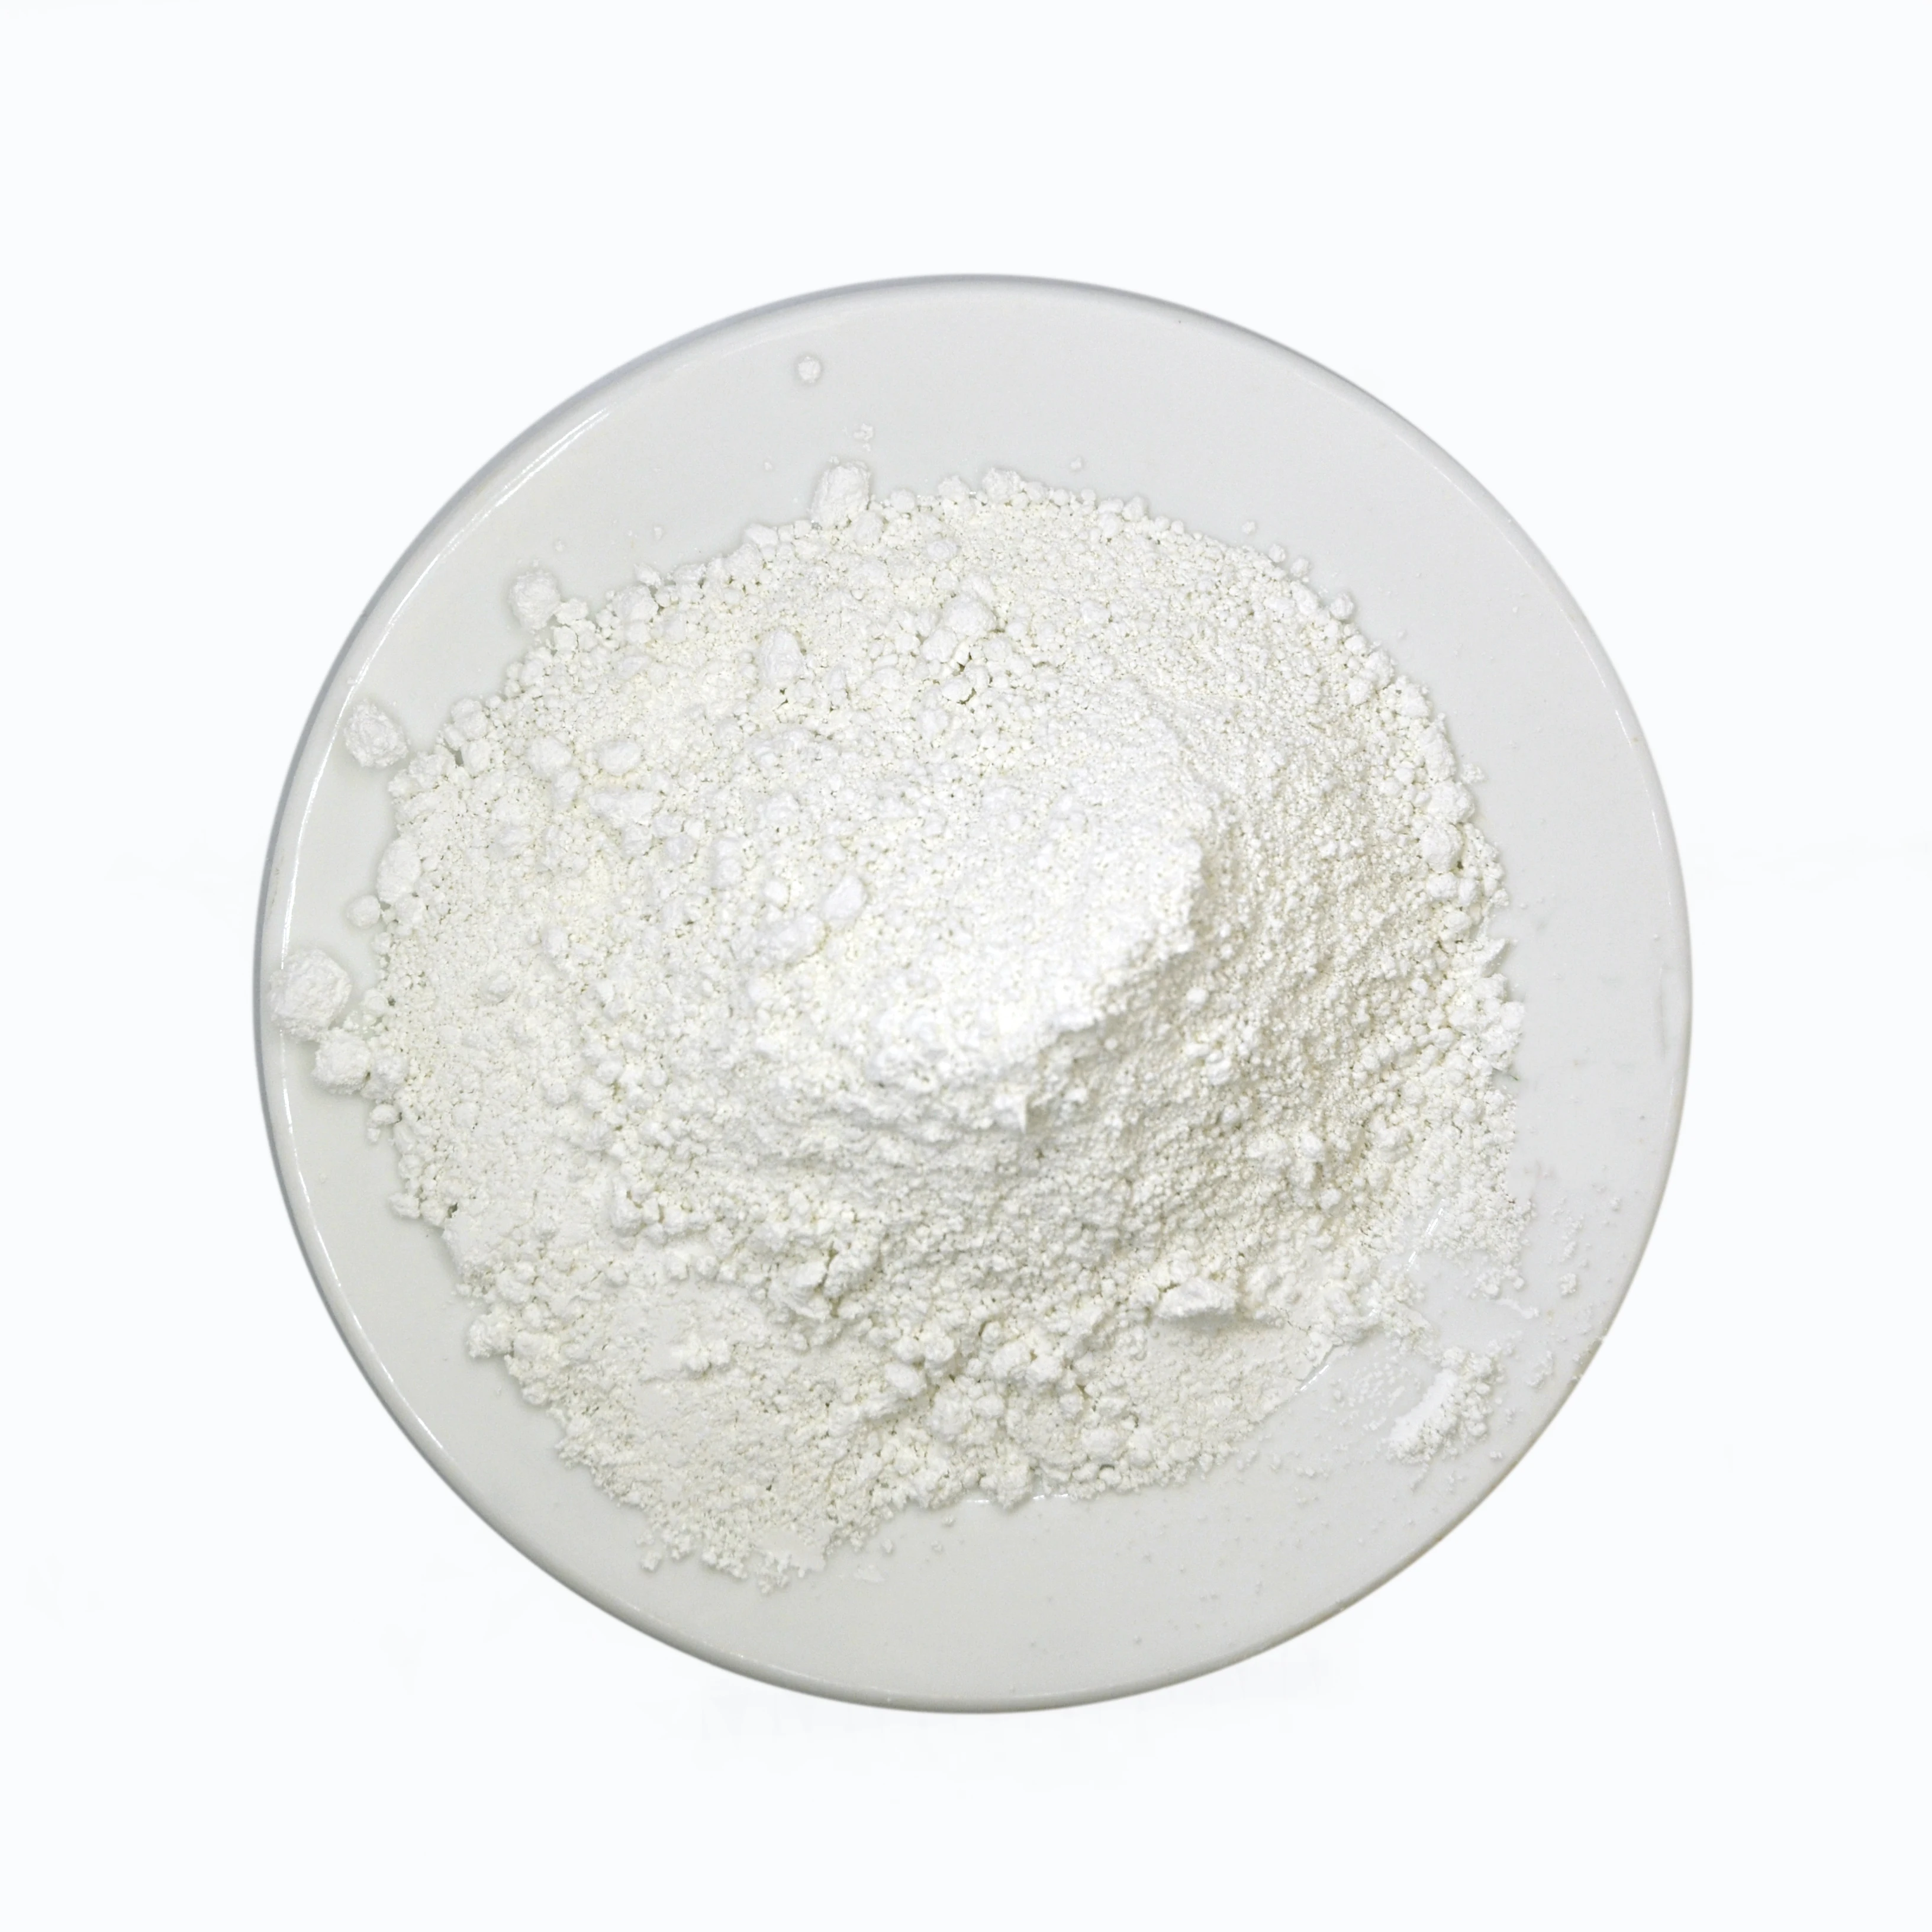 Hot sale per ton calcined washed kaolin porcelain clay powder materials brique for ruber paint coatings ceramics paper